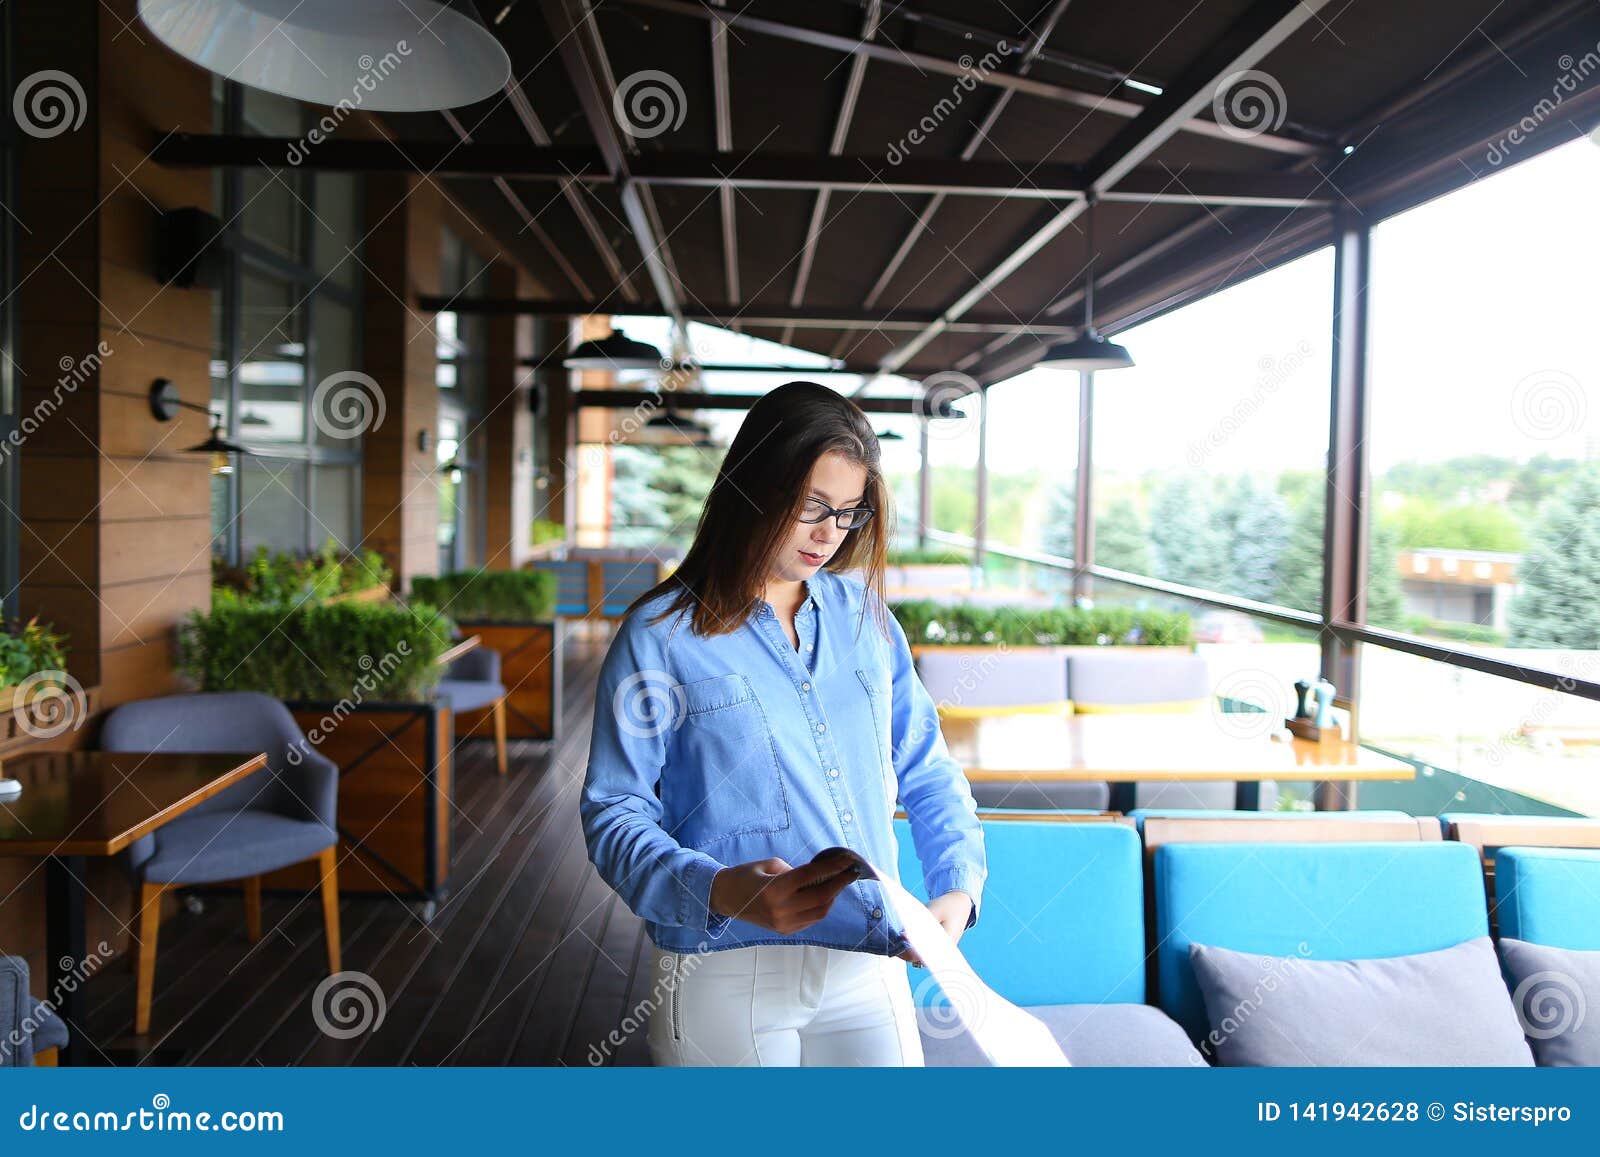 Pretty Woman Reading Menu at Restaurant with Close Up Face . Stock ...